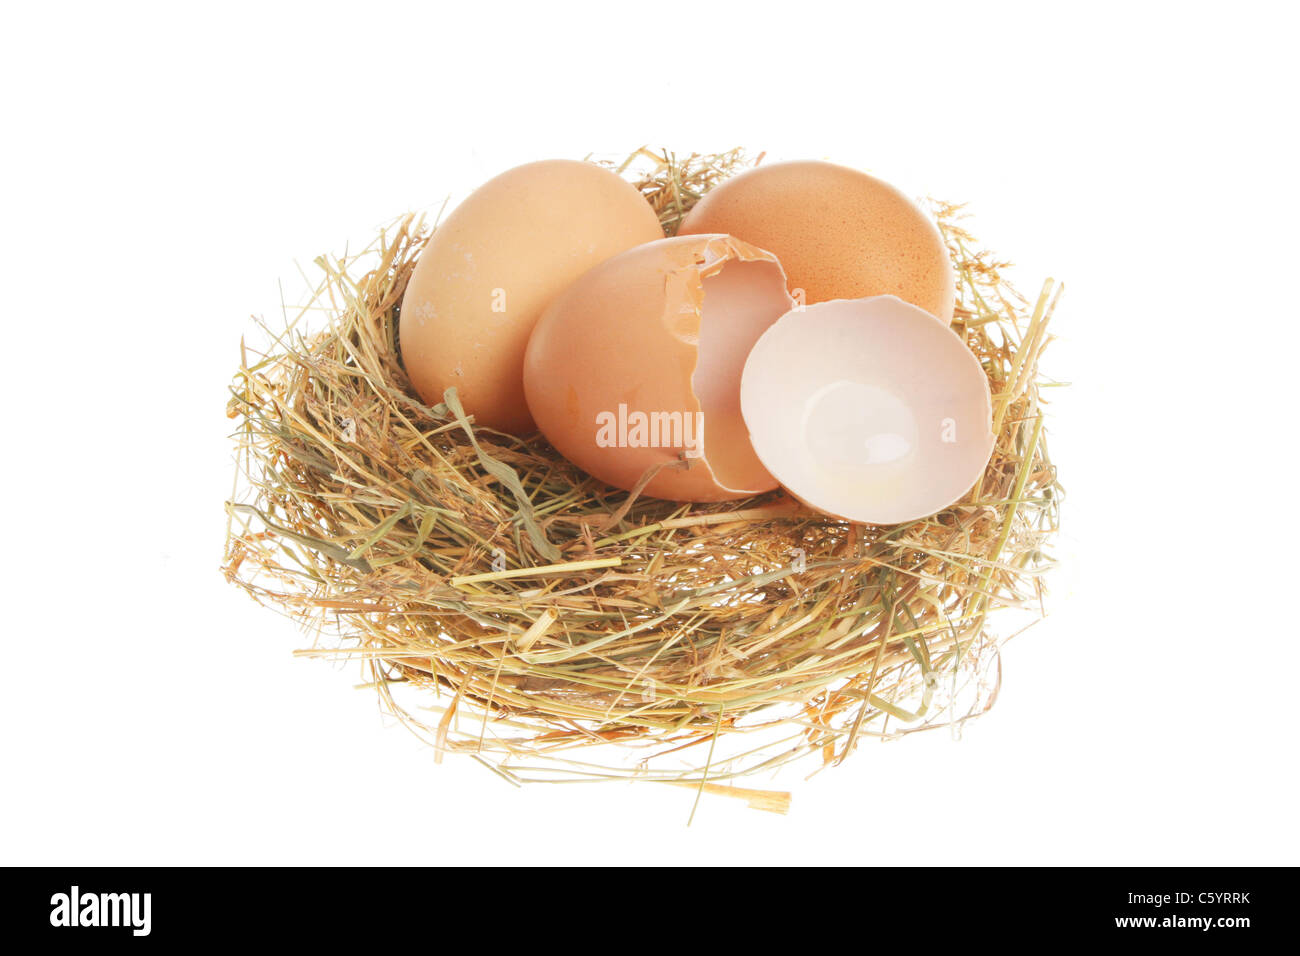 Whole and broken chicken eggs on a nest of straw Stock Photo